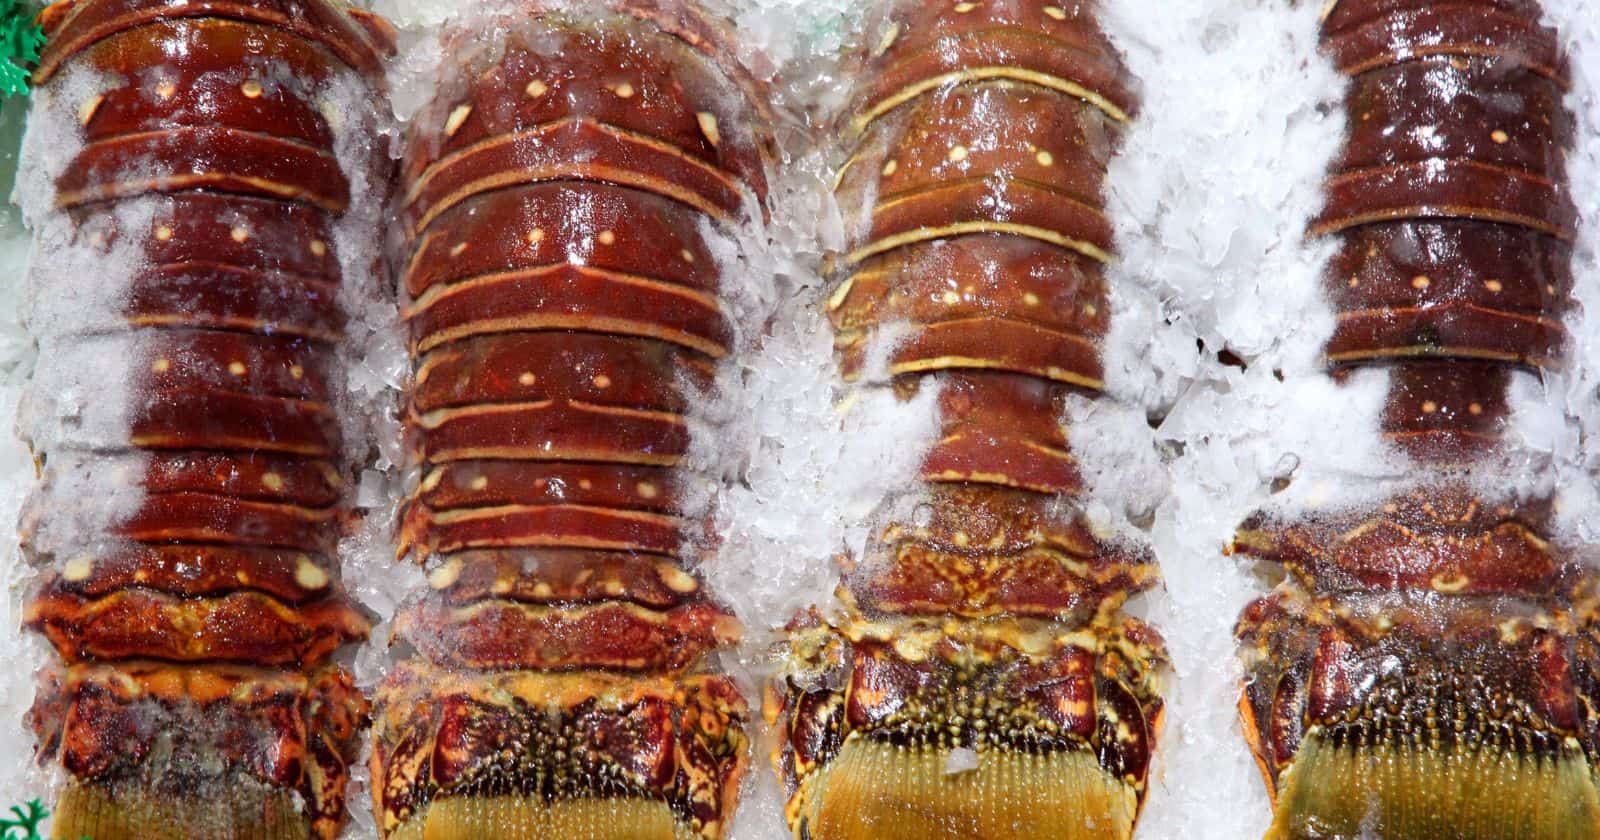 how long is lobster good for in the freezer